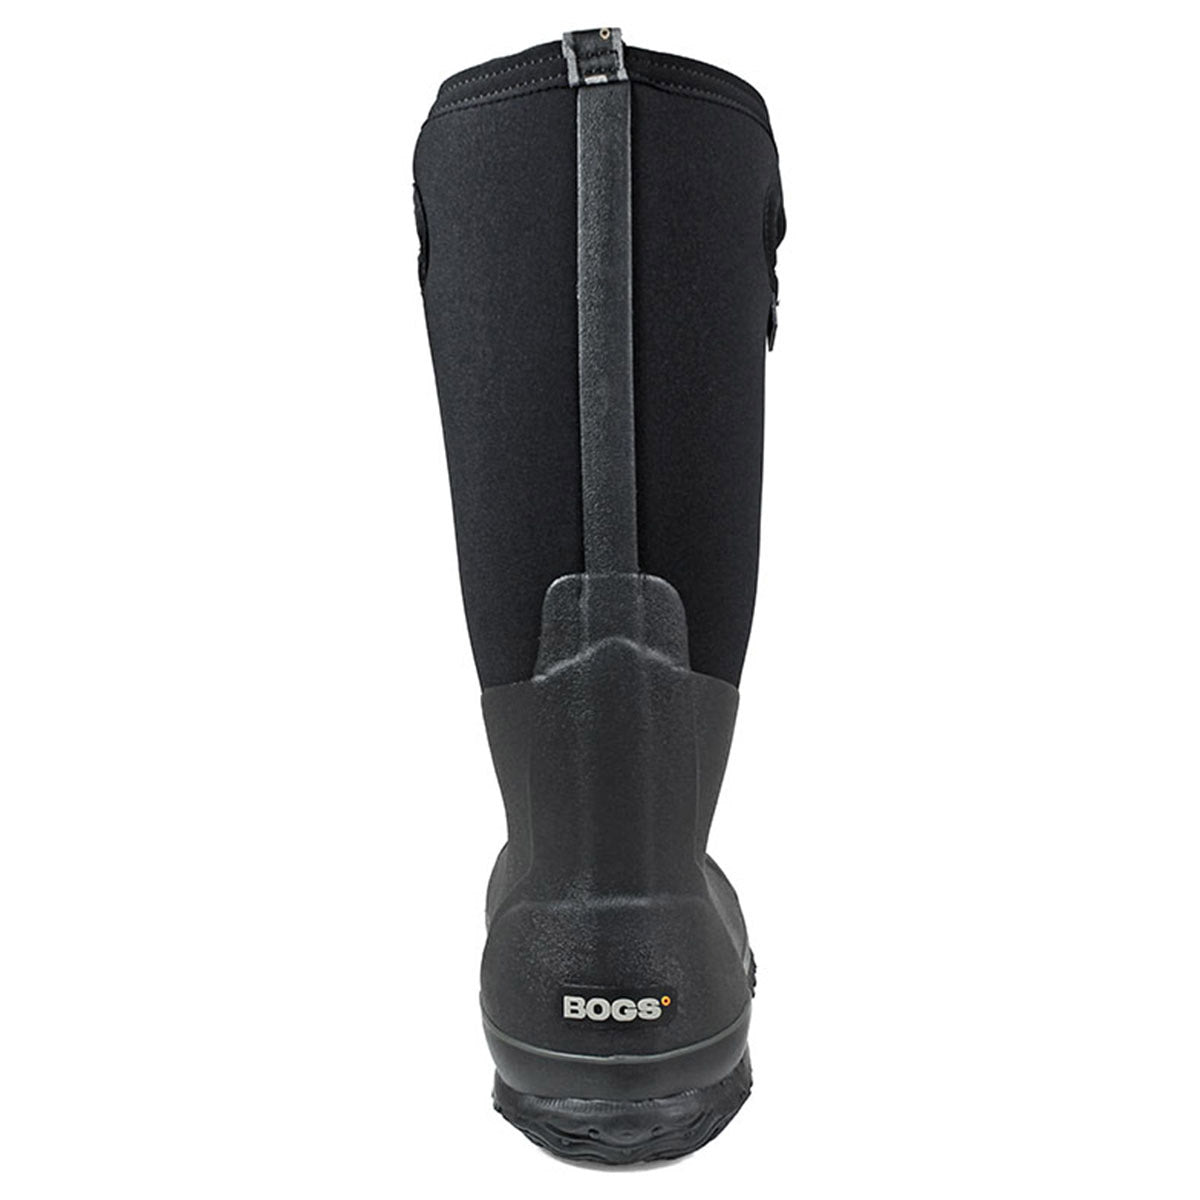 Sentence with replacements: Black neoprene and rubber Bogs Classic Tall boot with a side zipper.